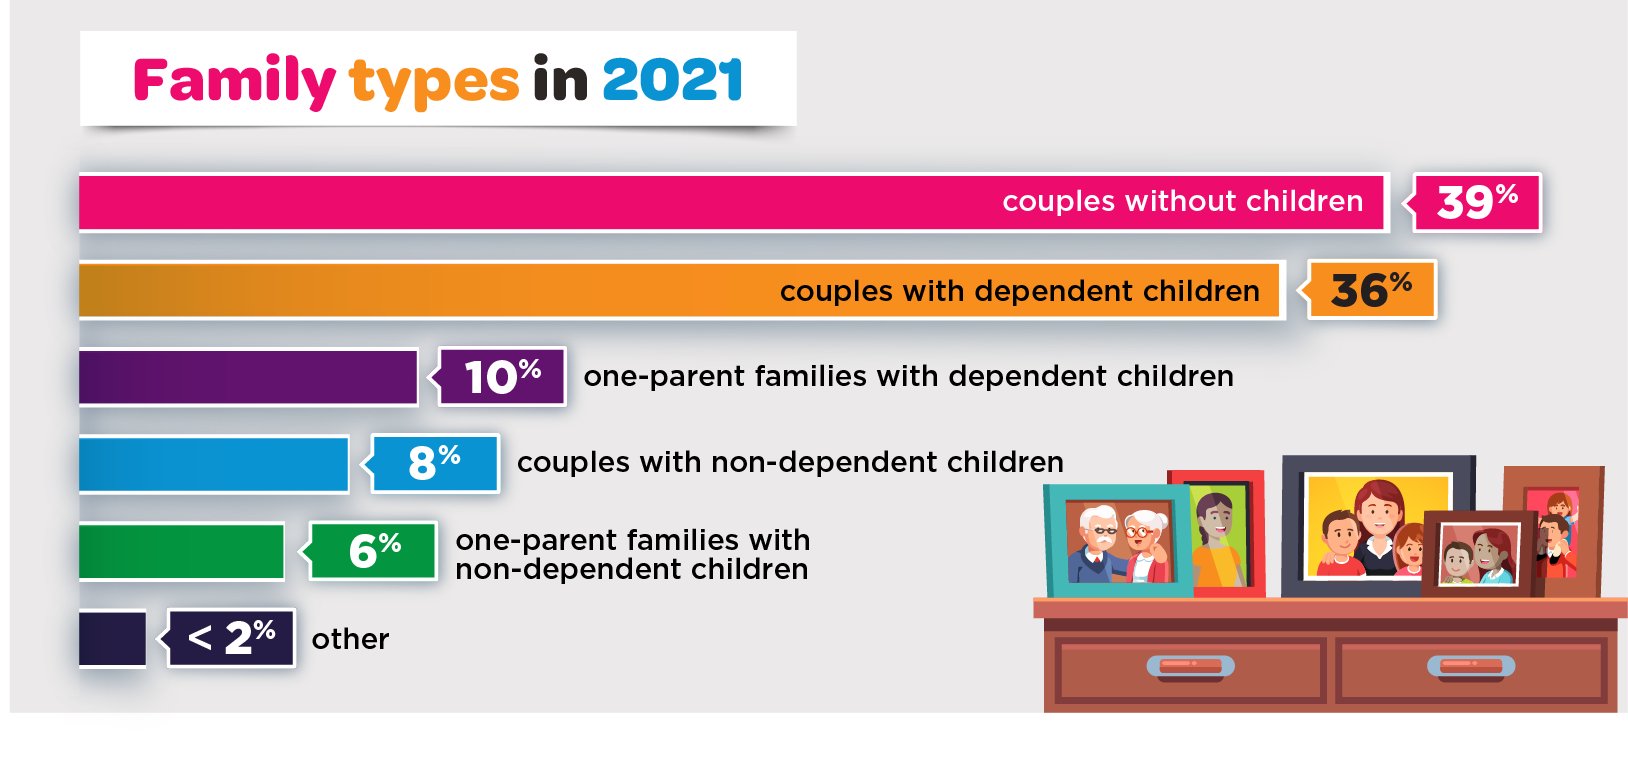 Infographic: Family types in 2021 – couples without children: 39%; couples with dependent children: 36%; one-parent families with dependent children: 10%; couples with non-dependent children: 8%; one-parent families with non-dependent children: 6%; other: less than 2%